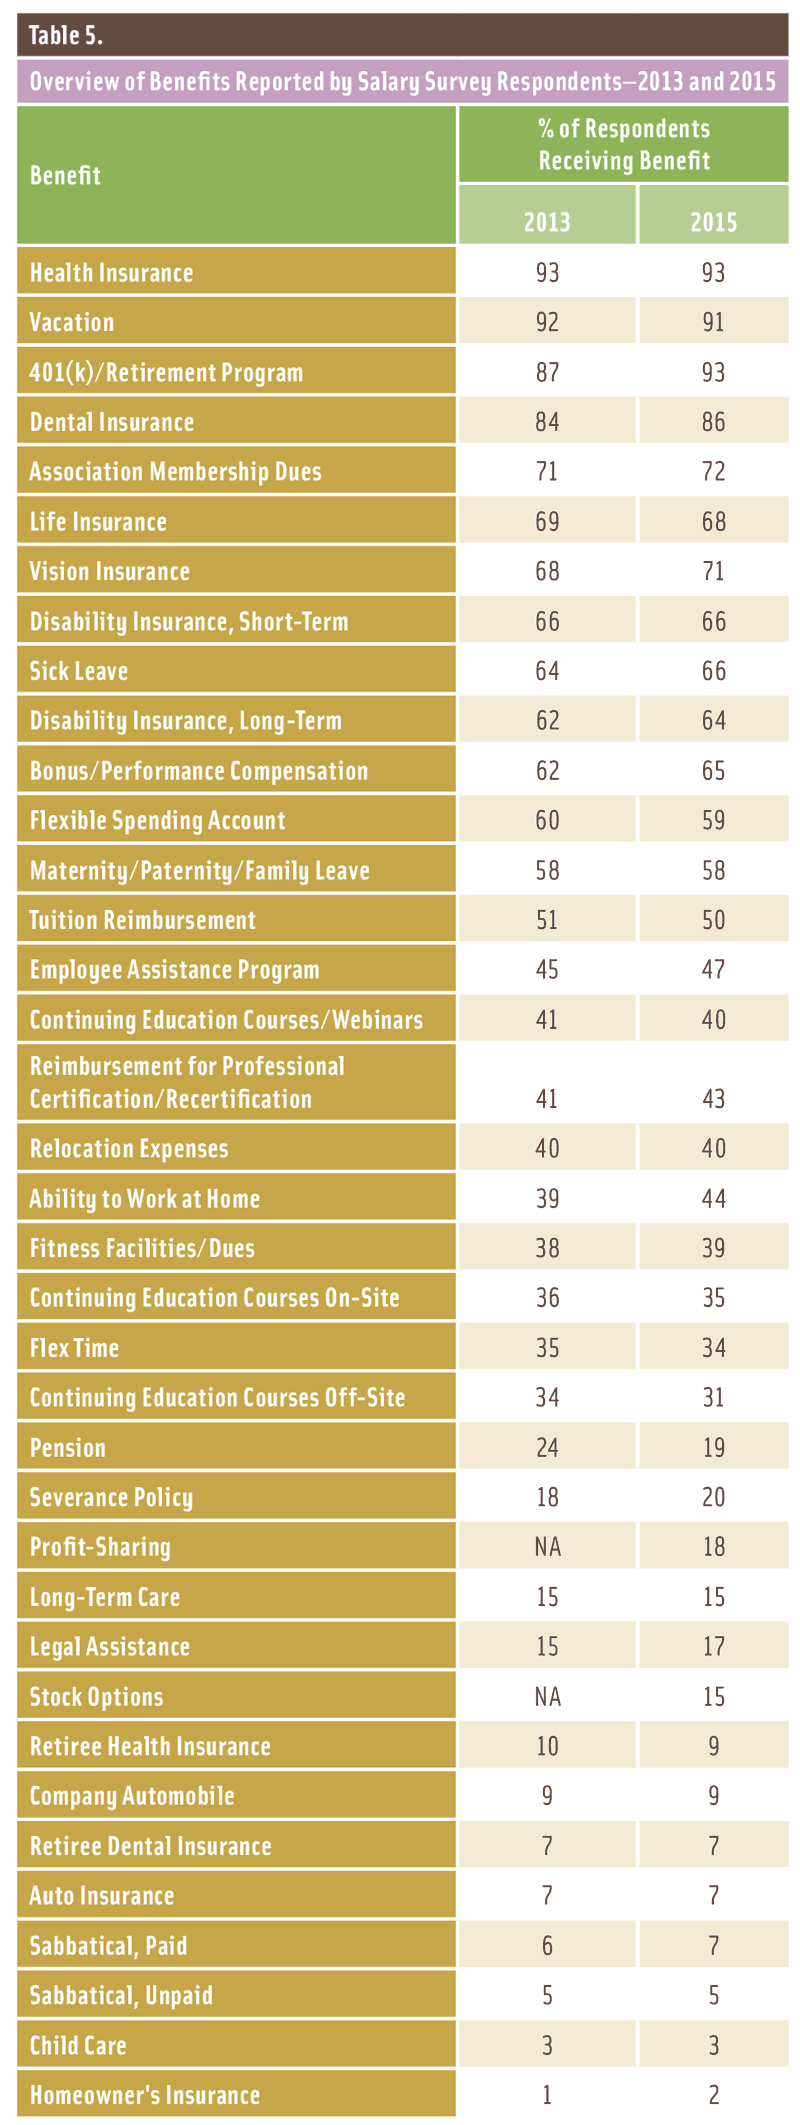 Table 5. Overview of Benefits Reported by Salary Survey Respondents—2013 and 2015